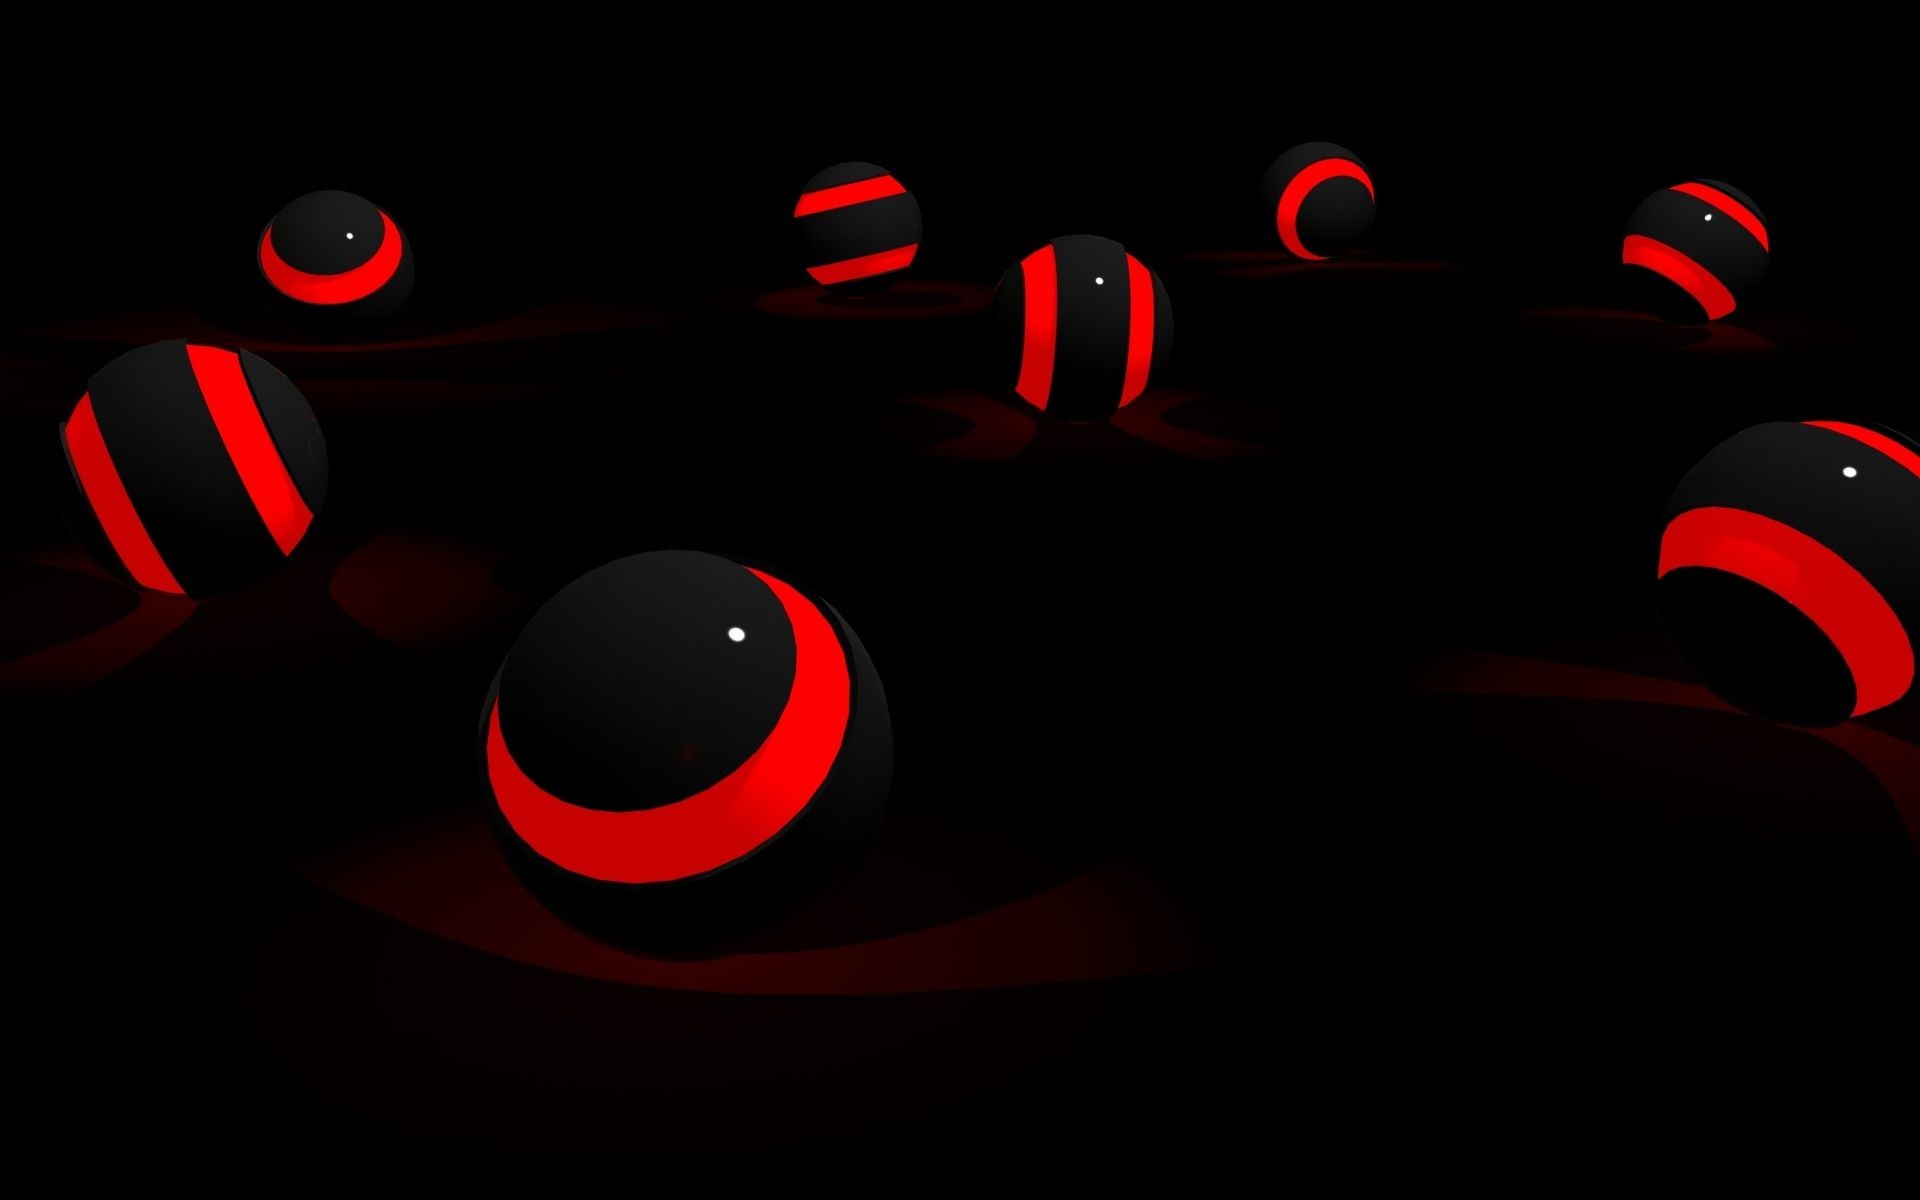 Collection of Black Red Wallpaper Designs on HDWallpapers HD Black And Red Wallpapers Wallpapers